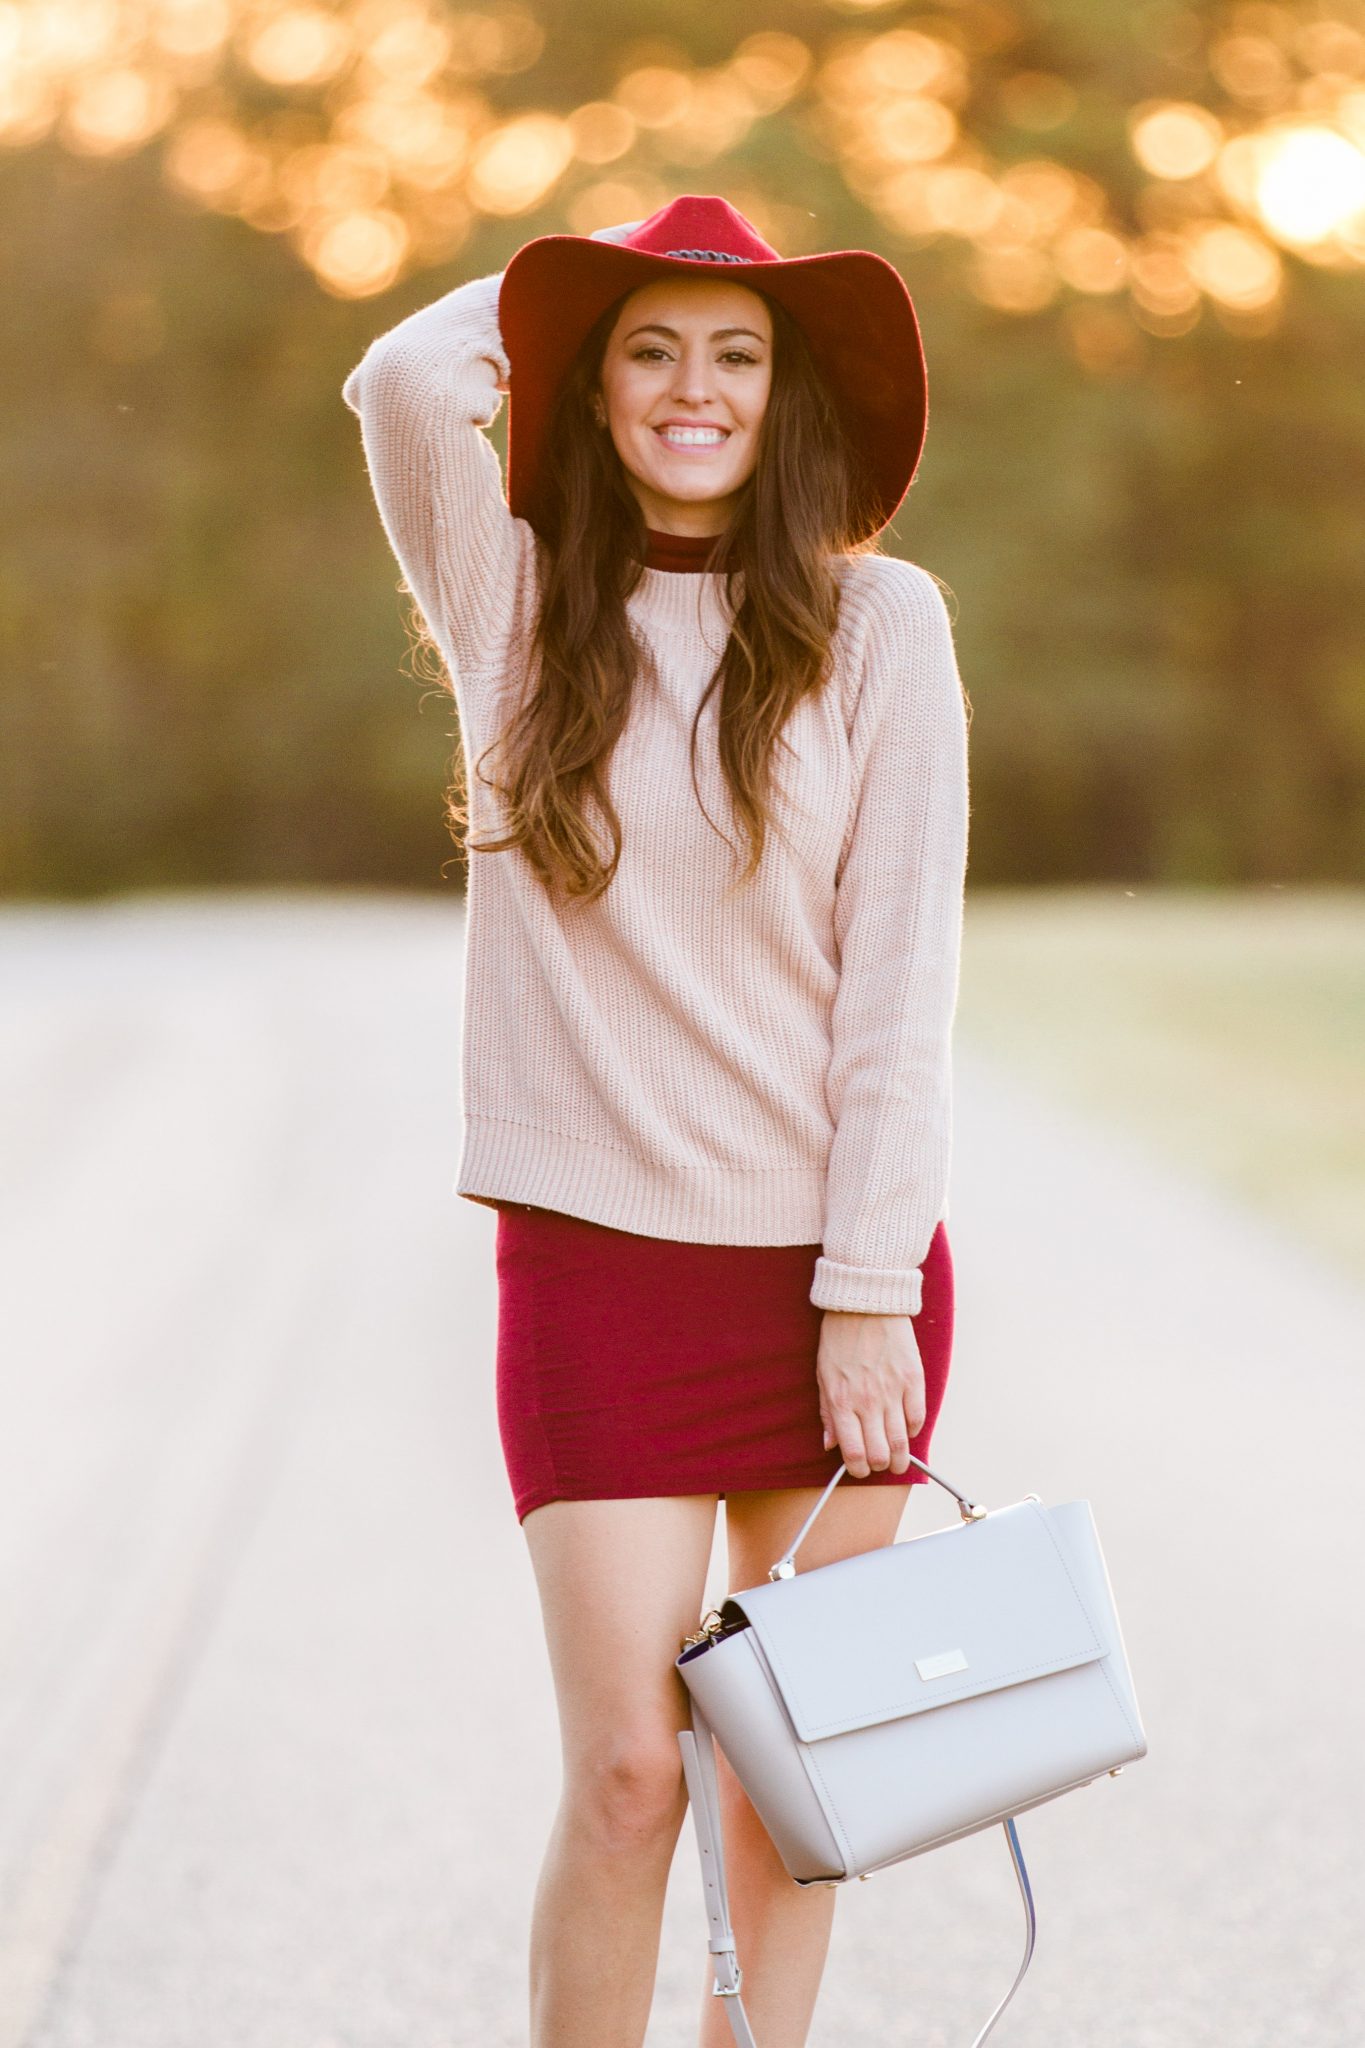 blush and wine color combination, best color combinations for fall, what colors to wear together for fall, pink and red, blush and burgundy, kate spade lilah, how to wear a floppy hat for fall, how to wear a wide brim hat for fall, fall style, fall trends, fall trendy style, fall outfit ideas